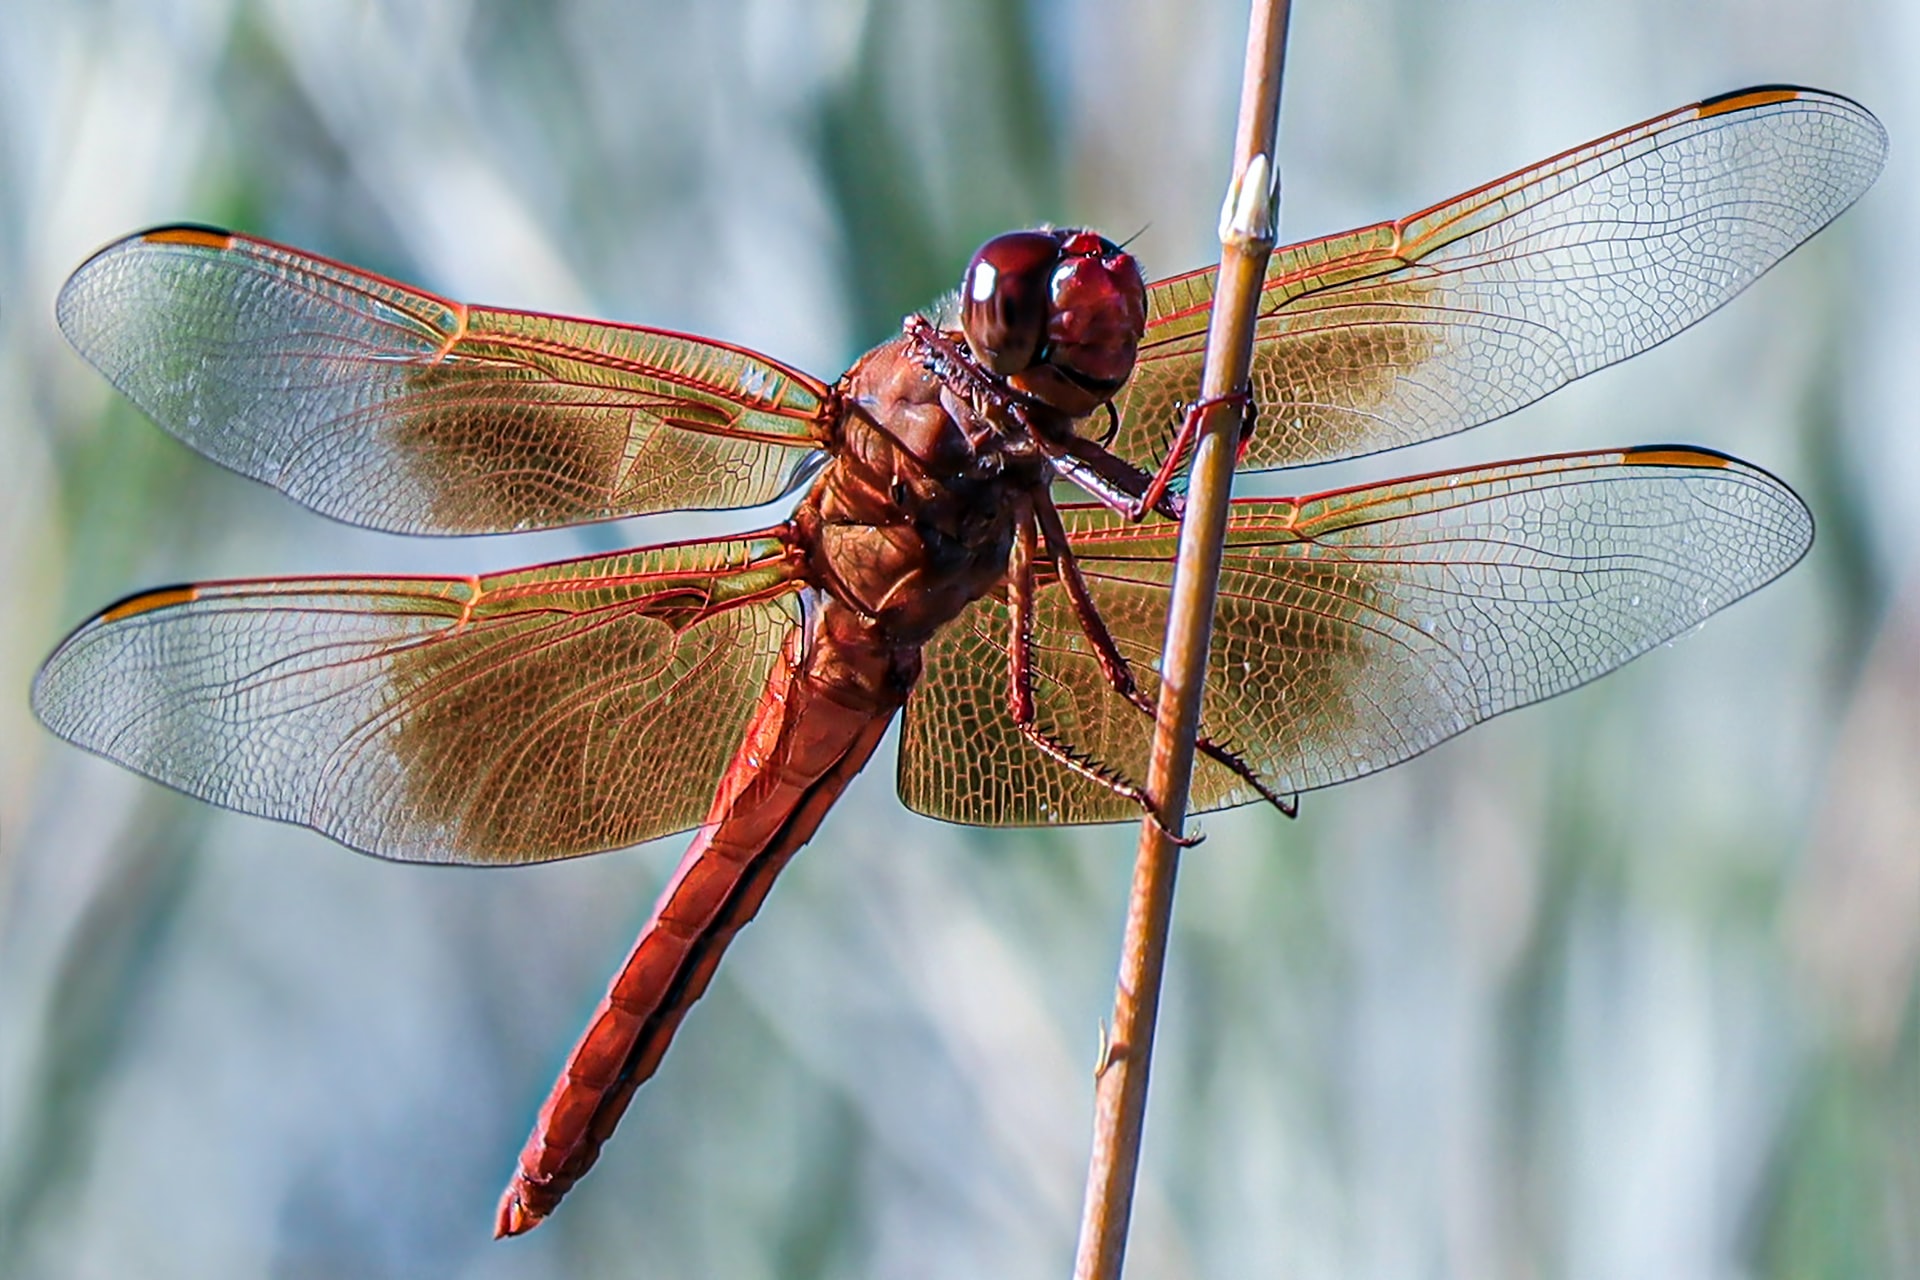 A large red dragon fly taking a rest